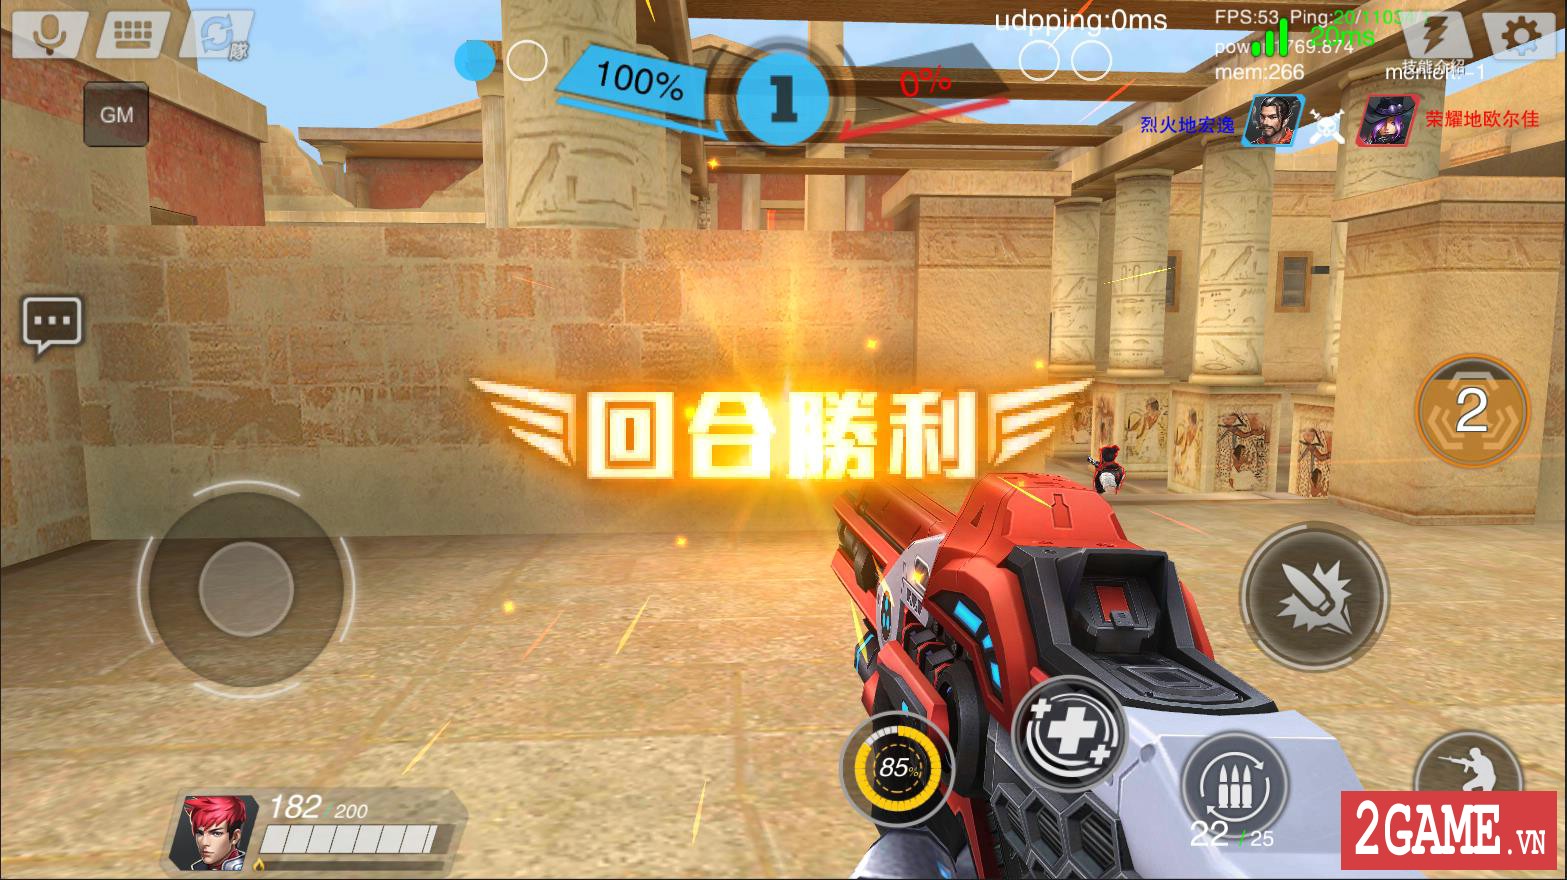 2game-dac-cong-anh-hung-mobile-4.jpg (1567×880)